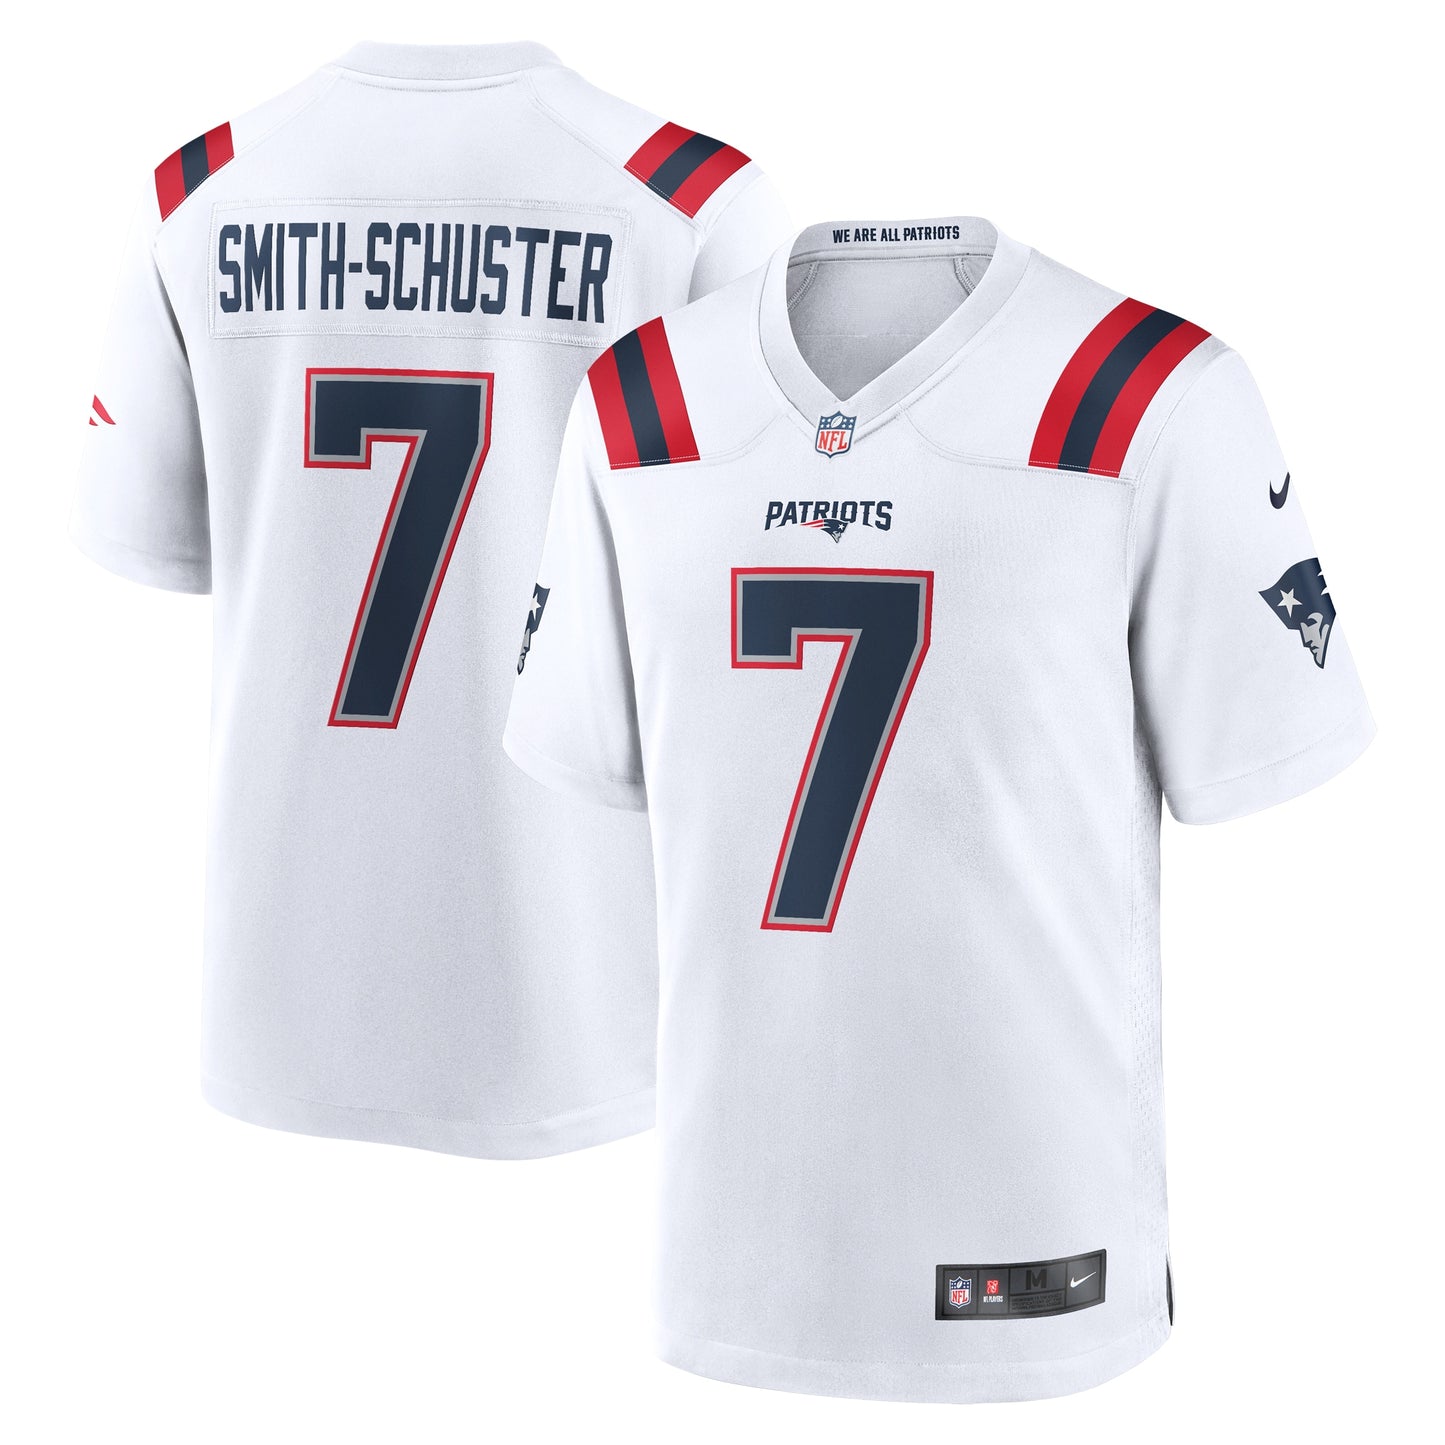 JuJu Smith-Schuster New England Patriots Nike Game Player Jersey - { White